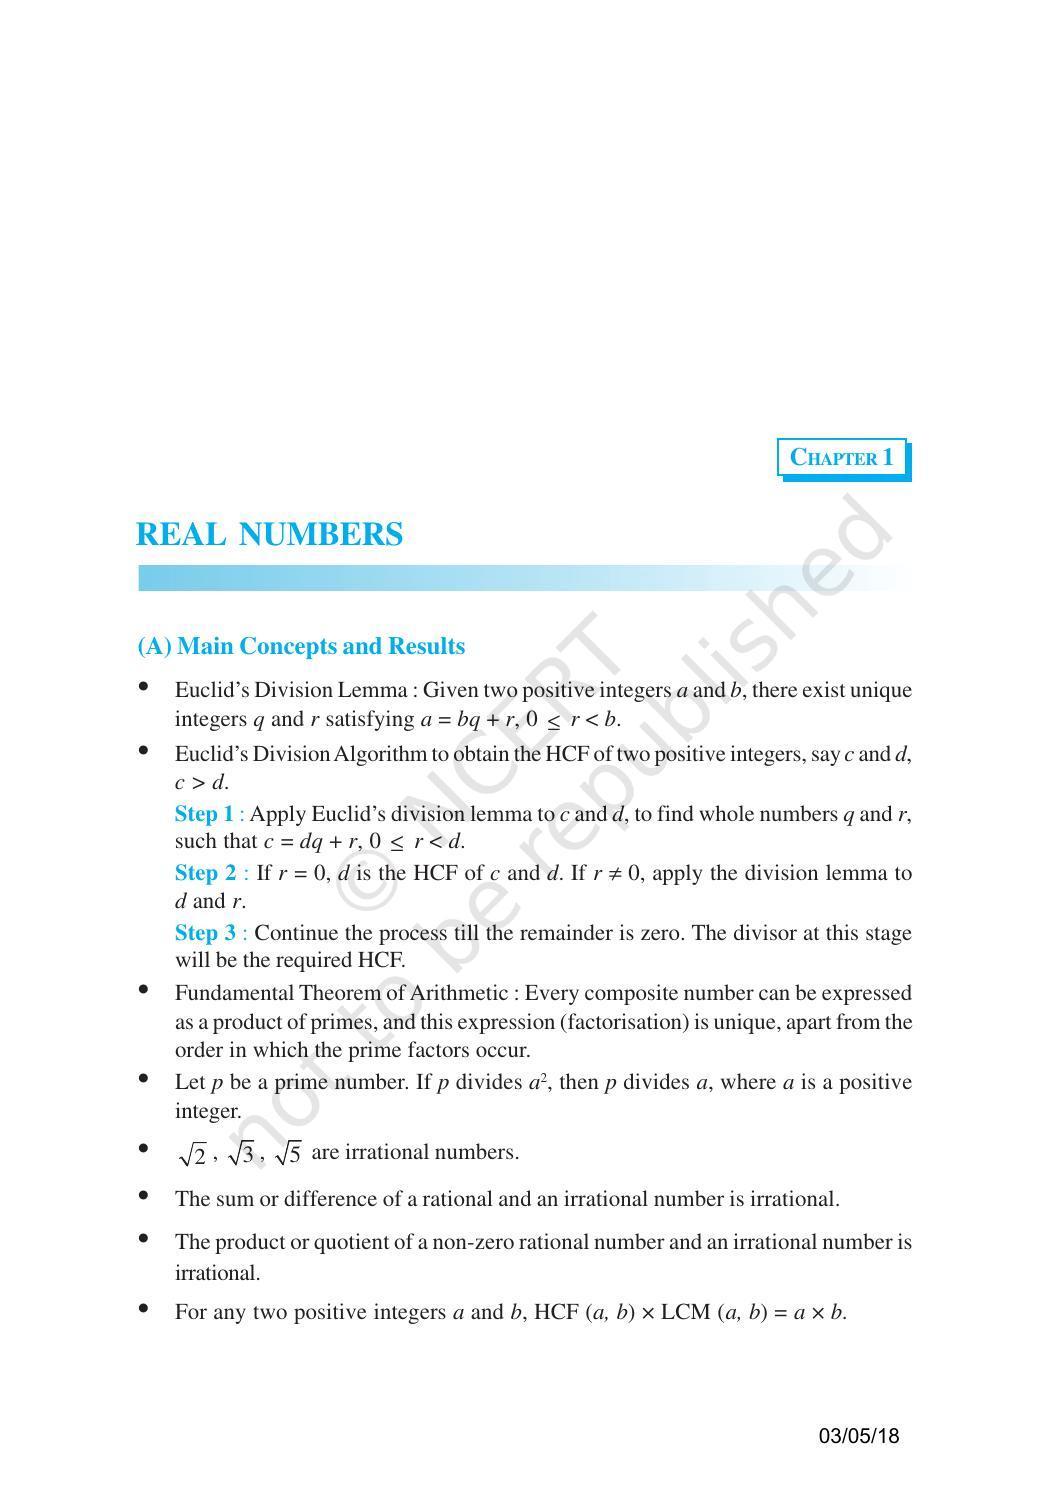 NCERT Exemplar Book for Class 10 Maths: Chapter 1 Real Numbers - Page 1